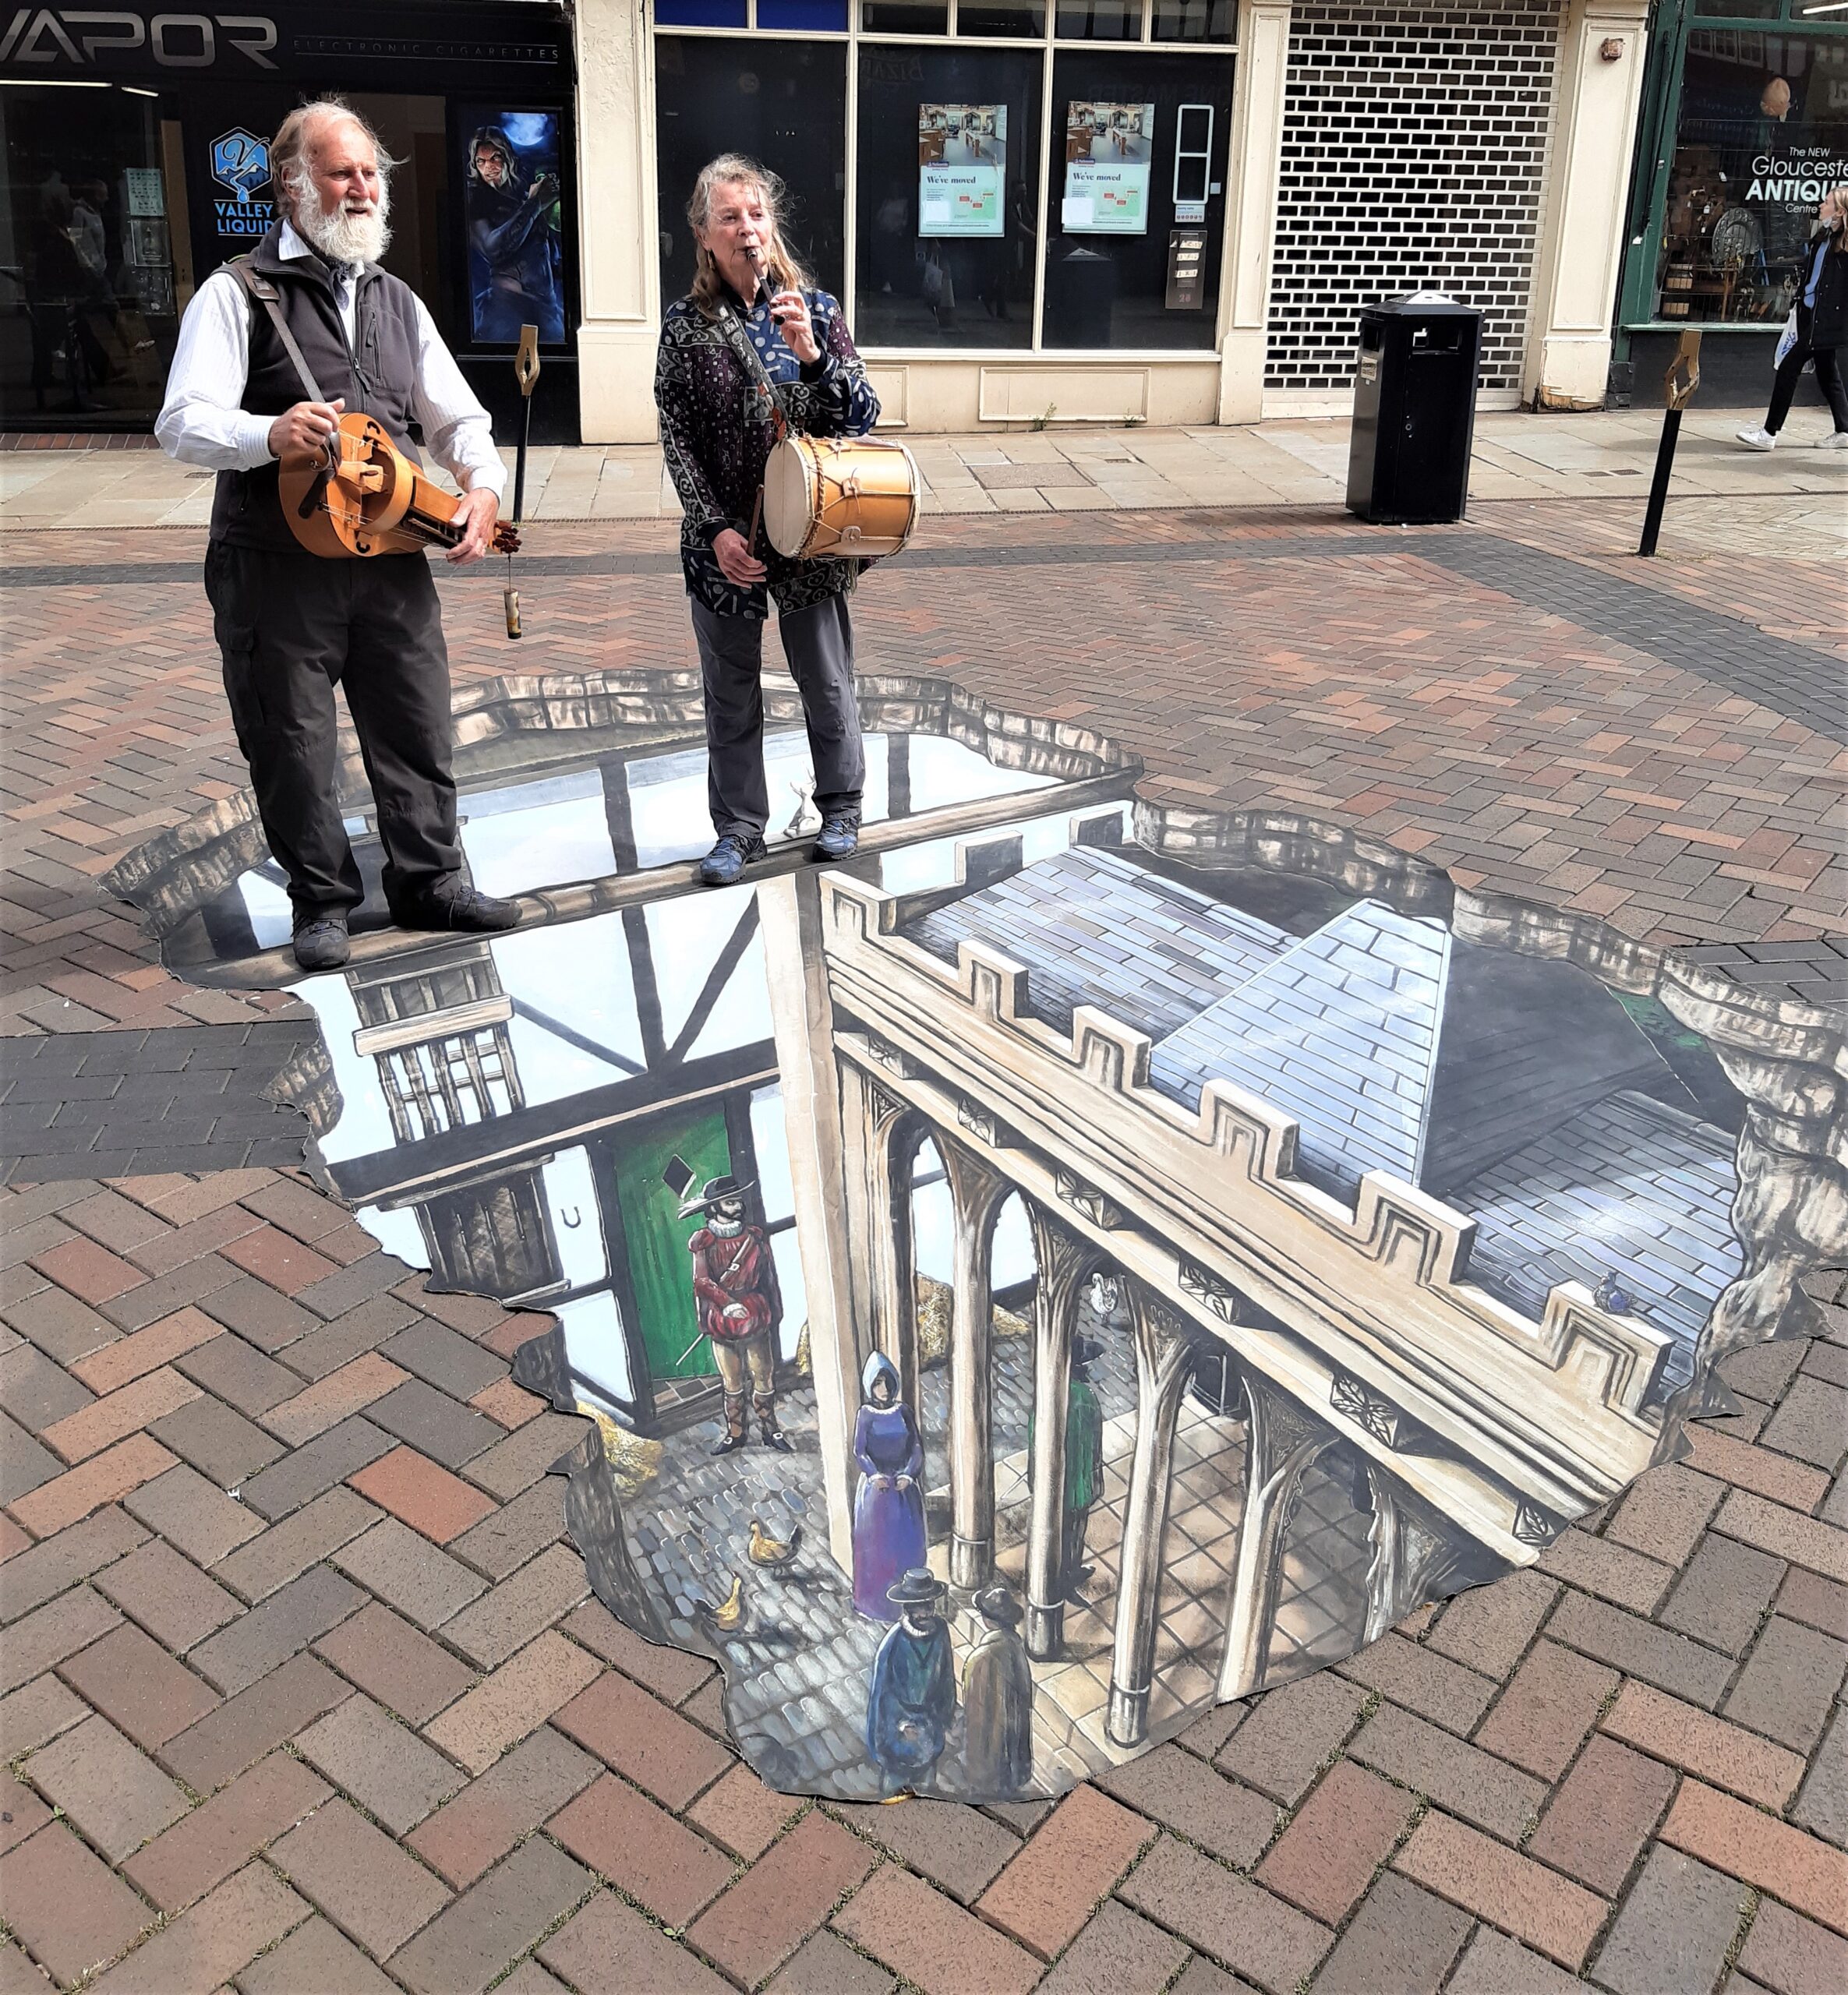 Photograph of two musicians in a public area, standing above mural of a mediaeval town - like a portal!